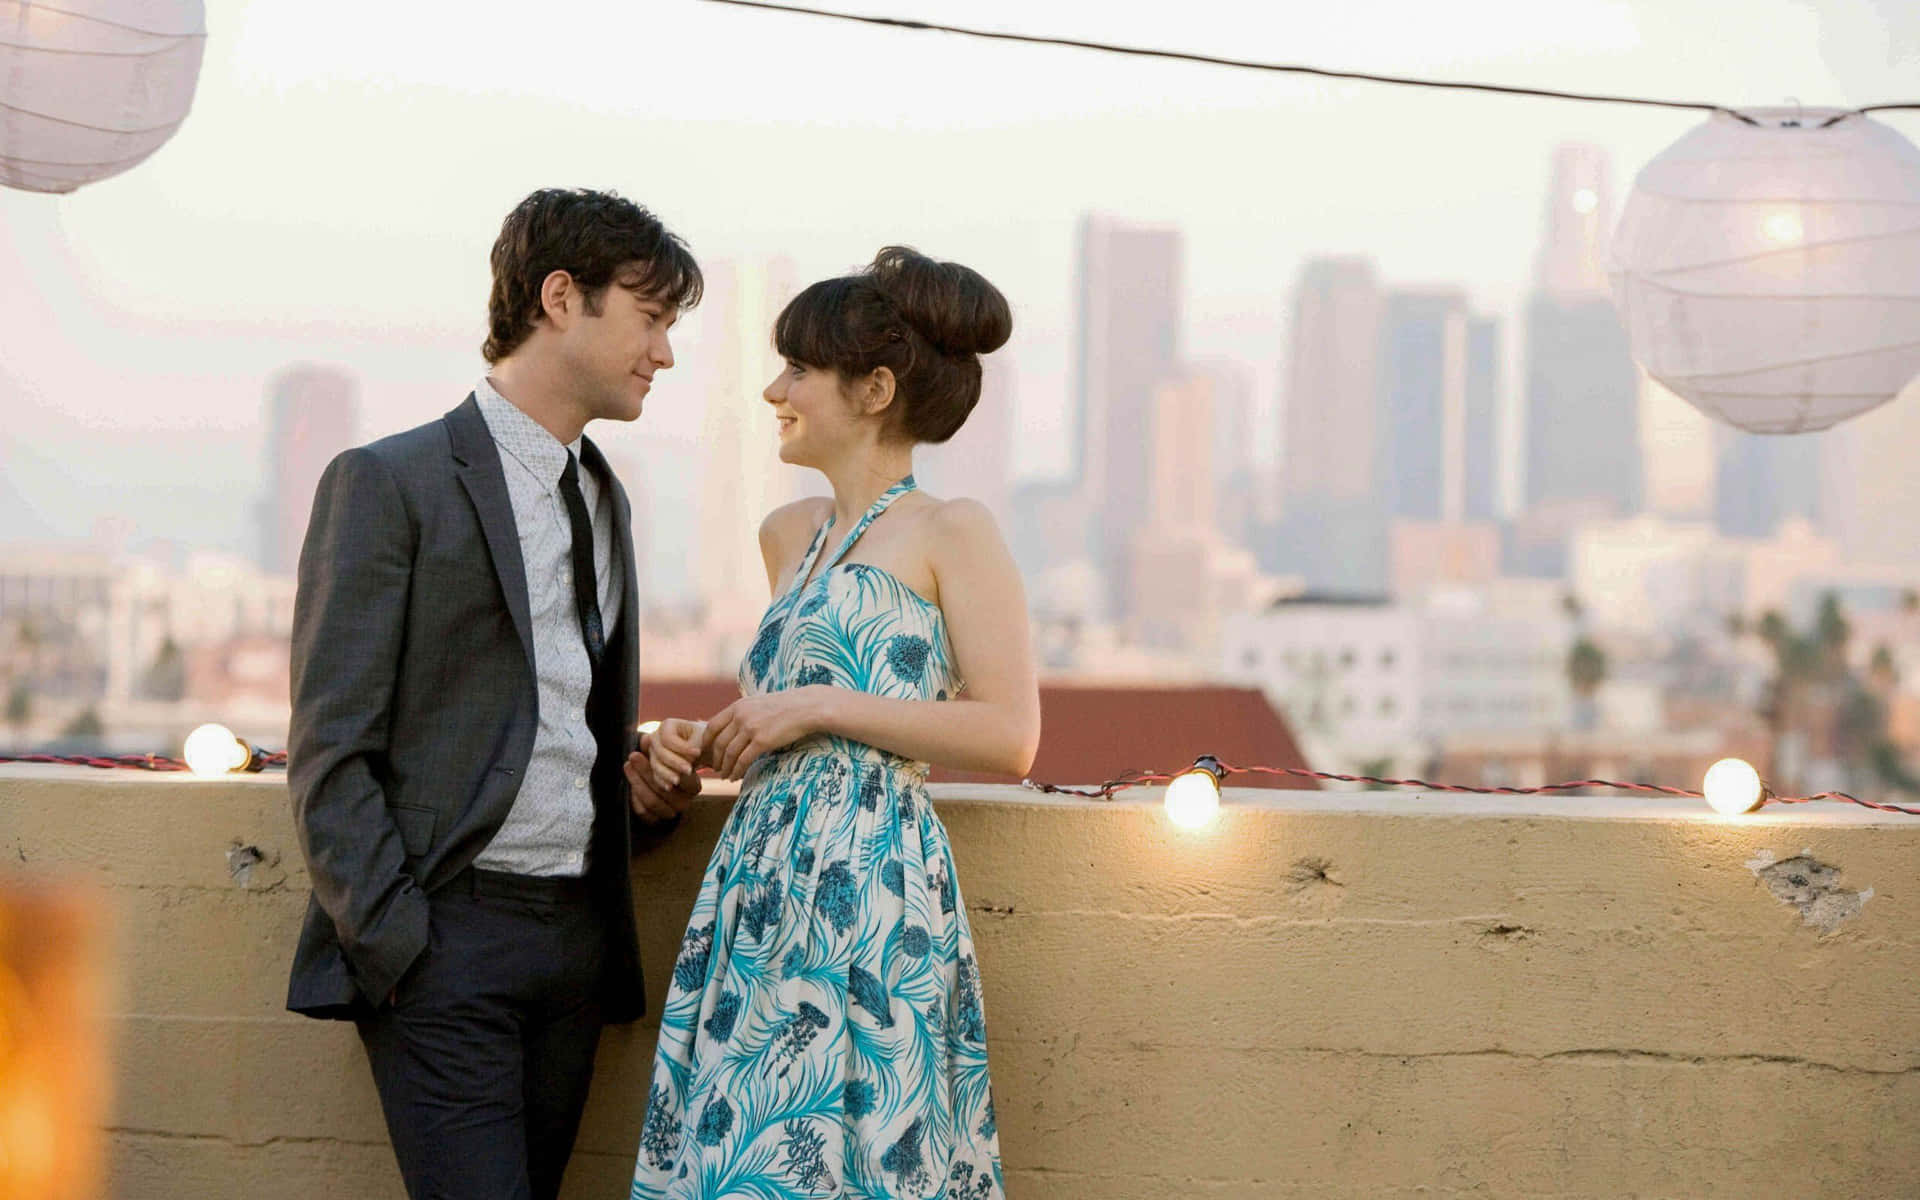 "Summer Afternoons In 500 Days Of Summer":